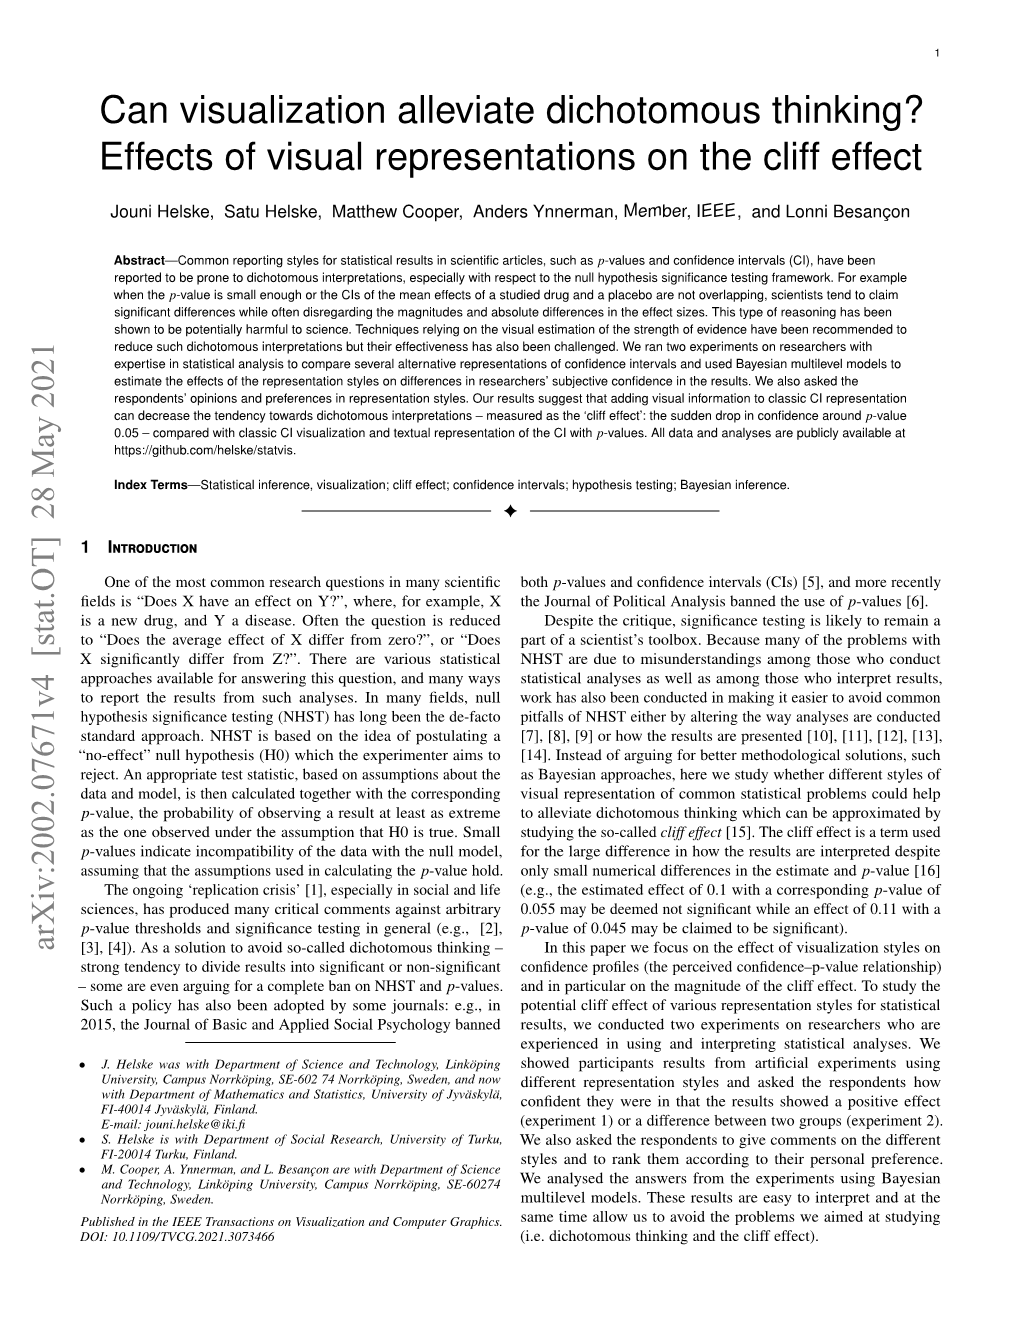 Can Visualization Alleviate Dichotomous Thinking? Effects of Visual Representations on the Cliff Effect